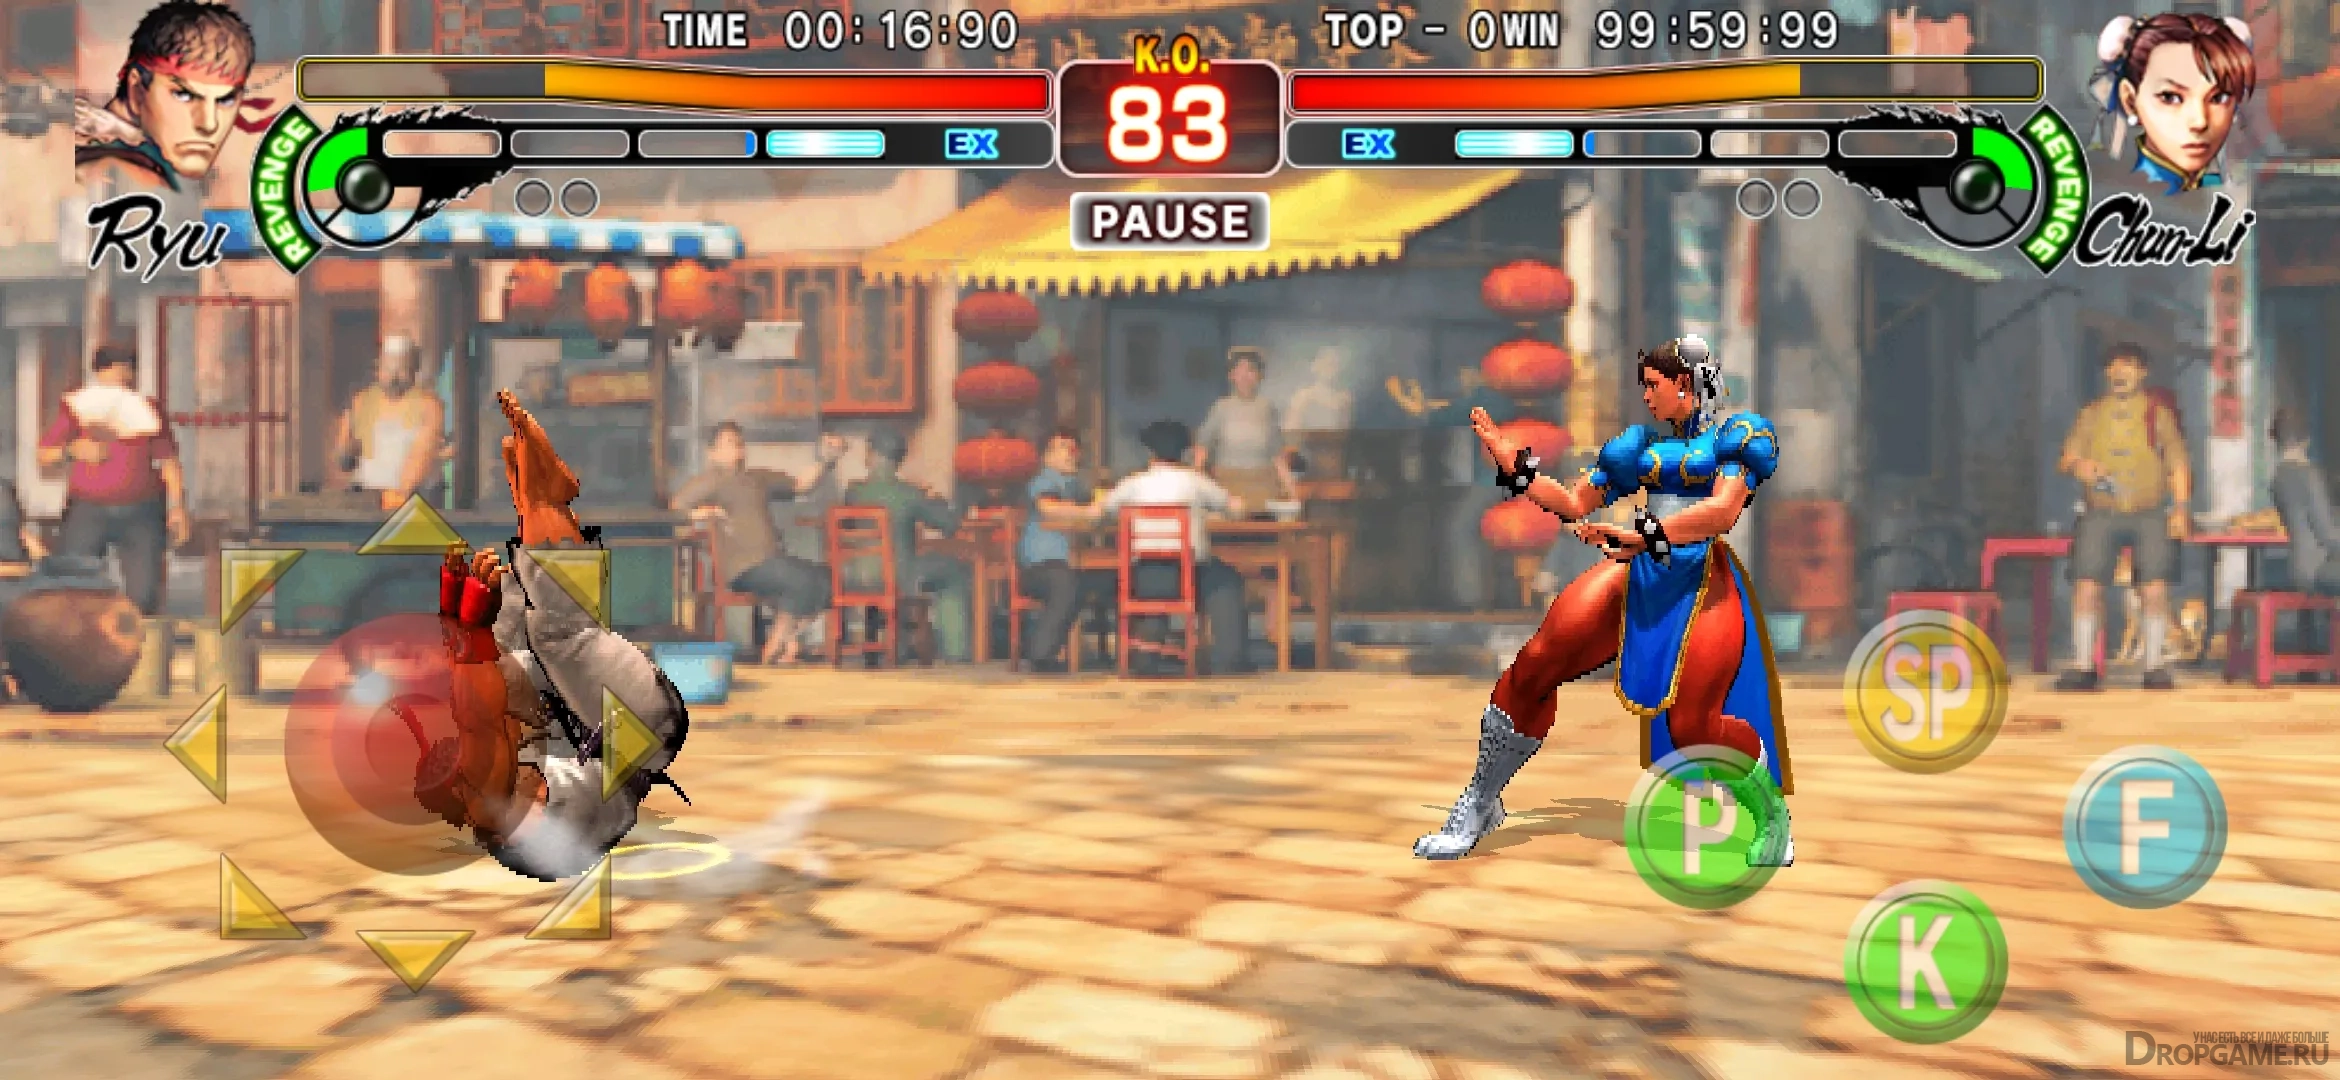 Capcom Mobile - Street Fighter 4: Champion Edition coming early July to the  App Store. Pre-register to be one of the first to download. -  bit.ly/SF4CE_PRE